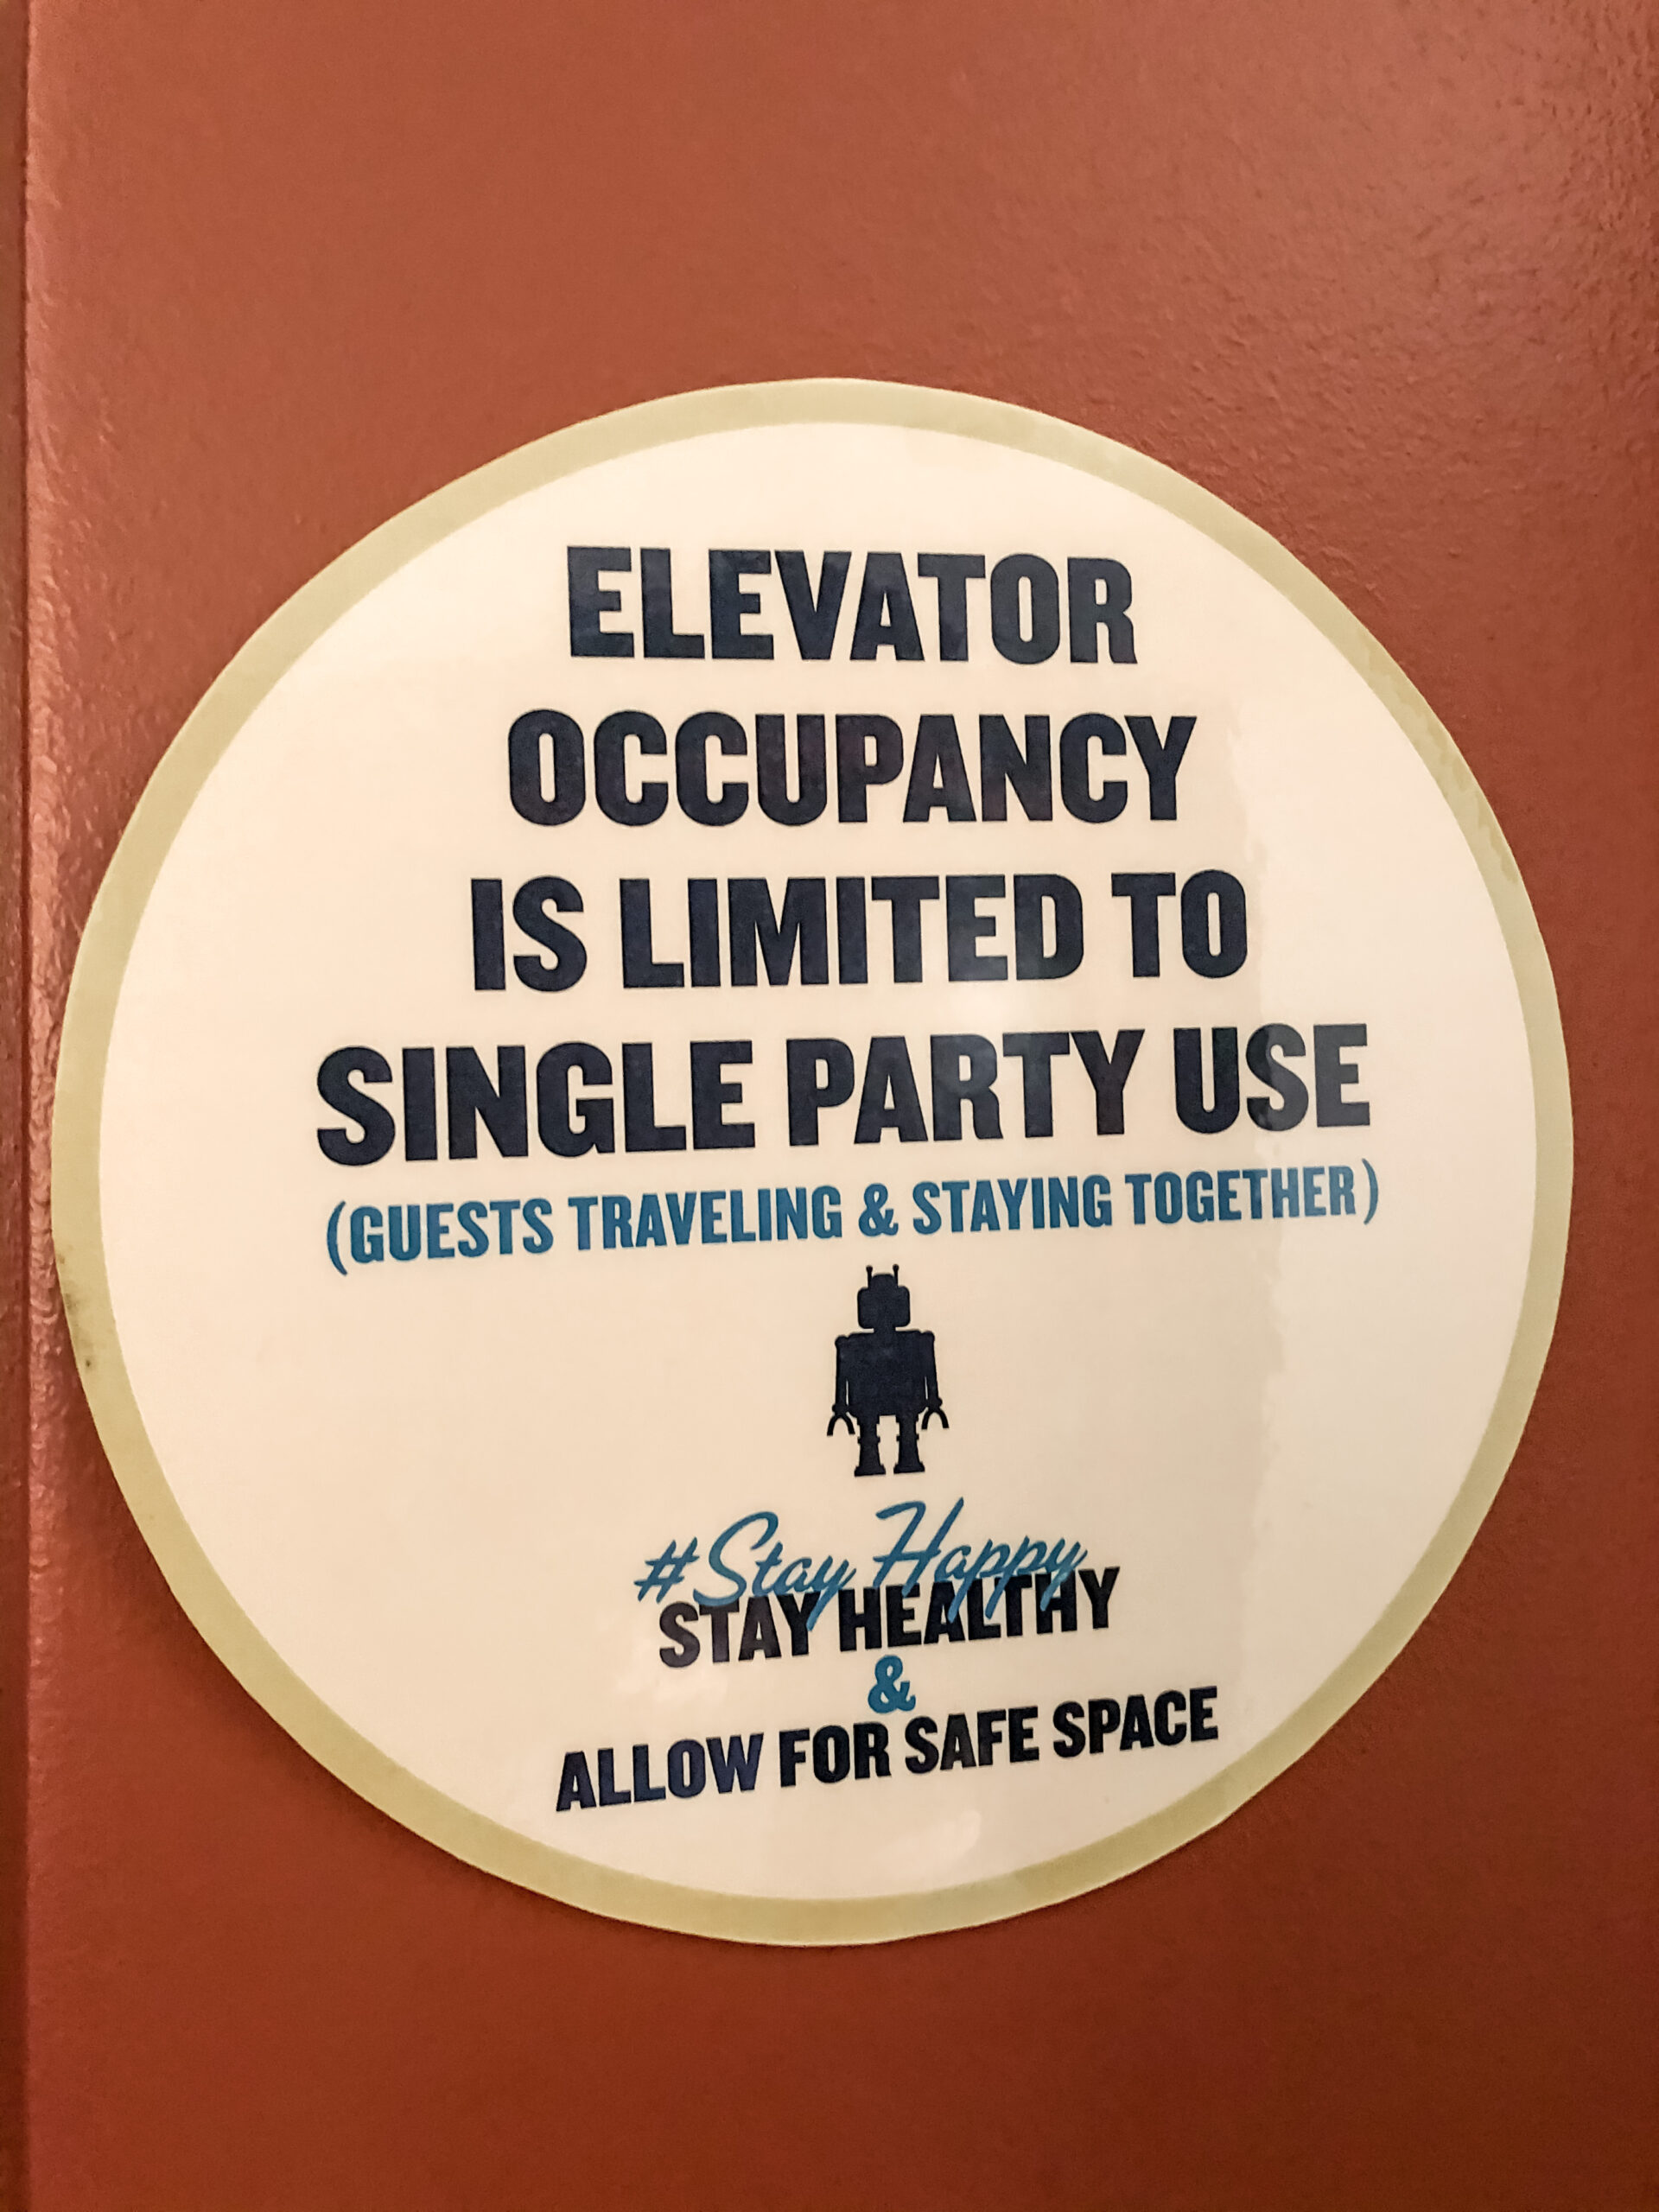 CleanStay at Hilton Hotels - Elevator ettiquette